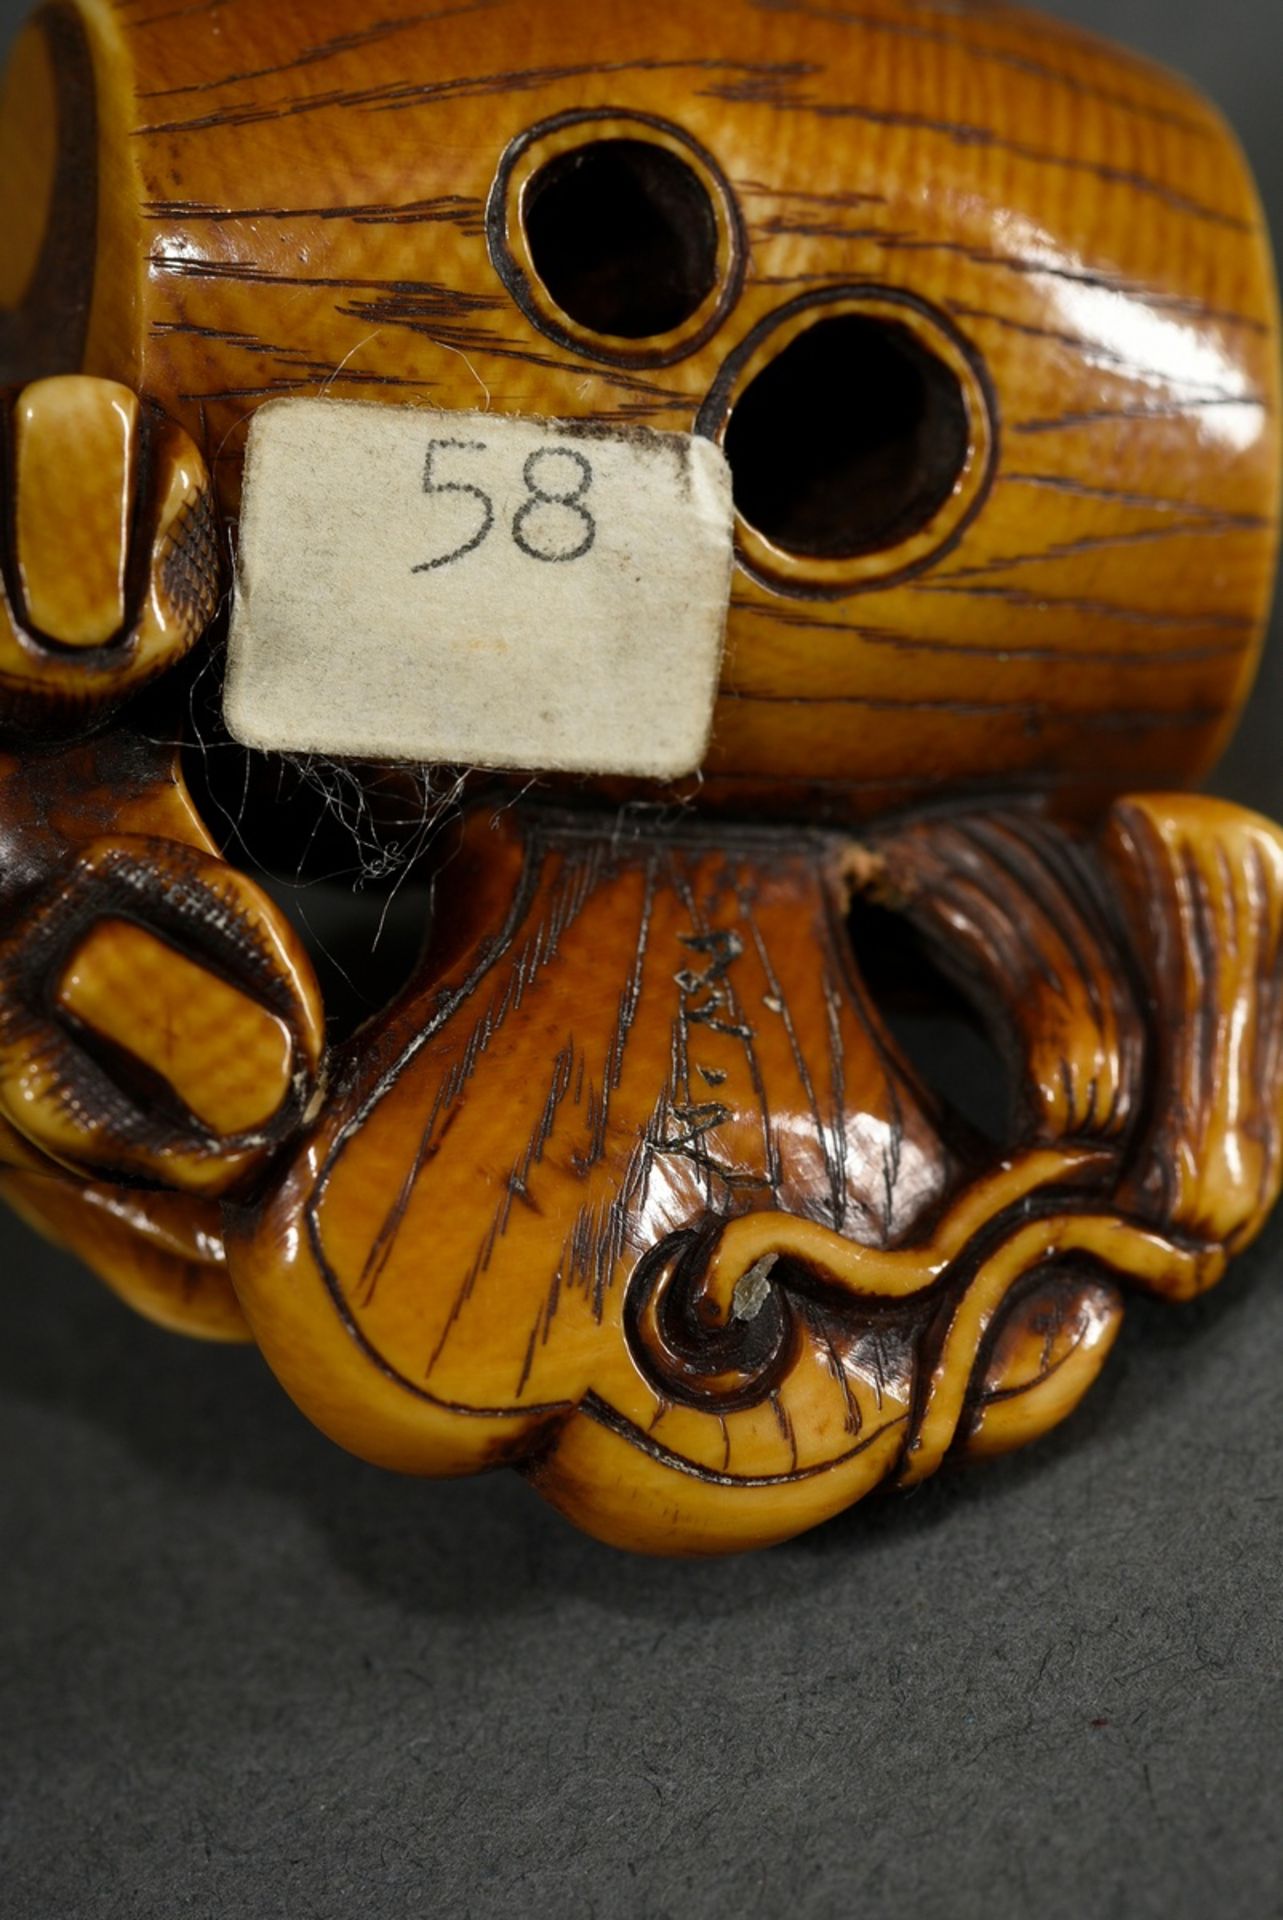 Ivory netsuke "Daikoku with huge rotten lucky hammer", patinated, incised signature, 4x5x2,5cm, per - Image 6 of 7